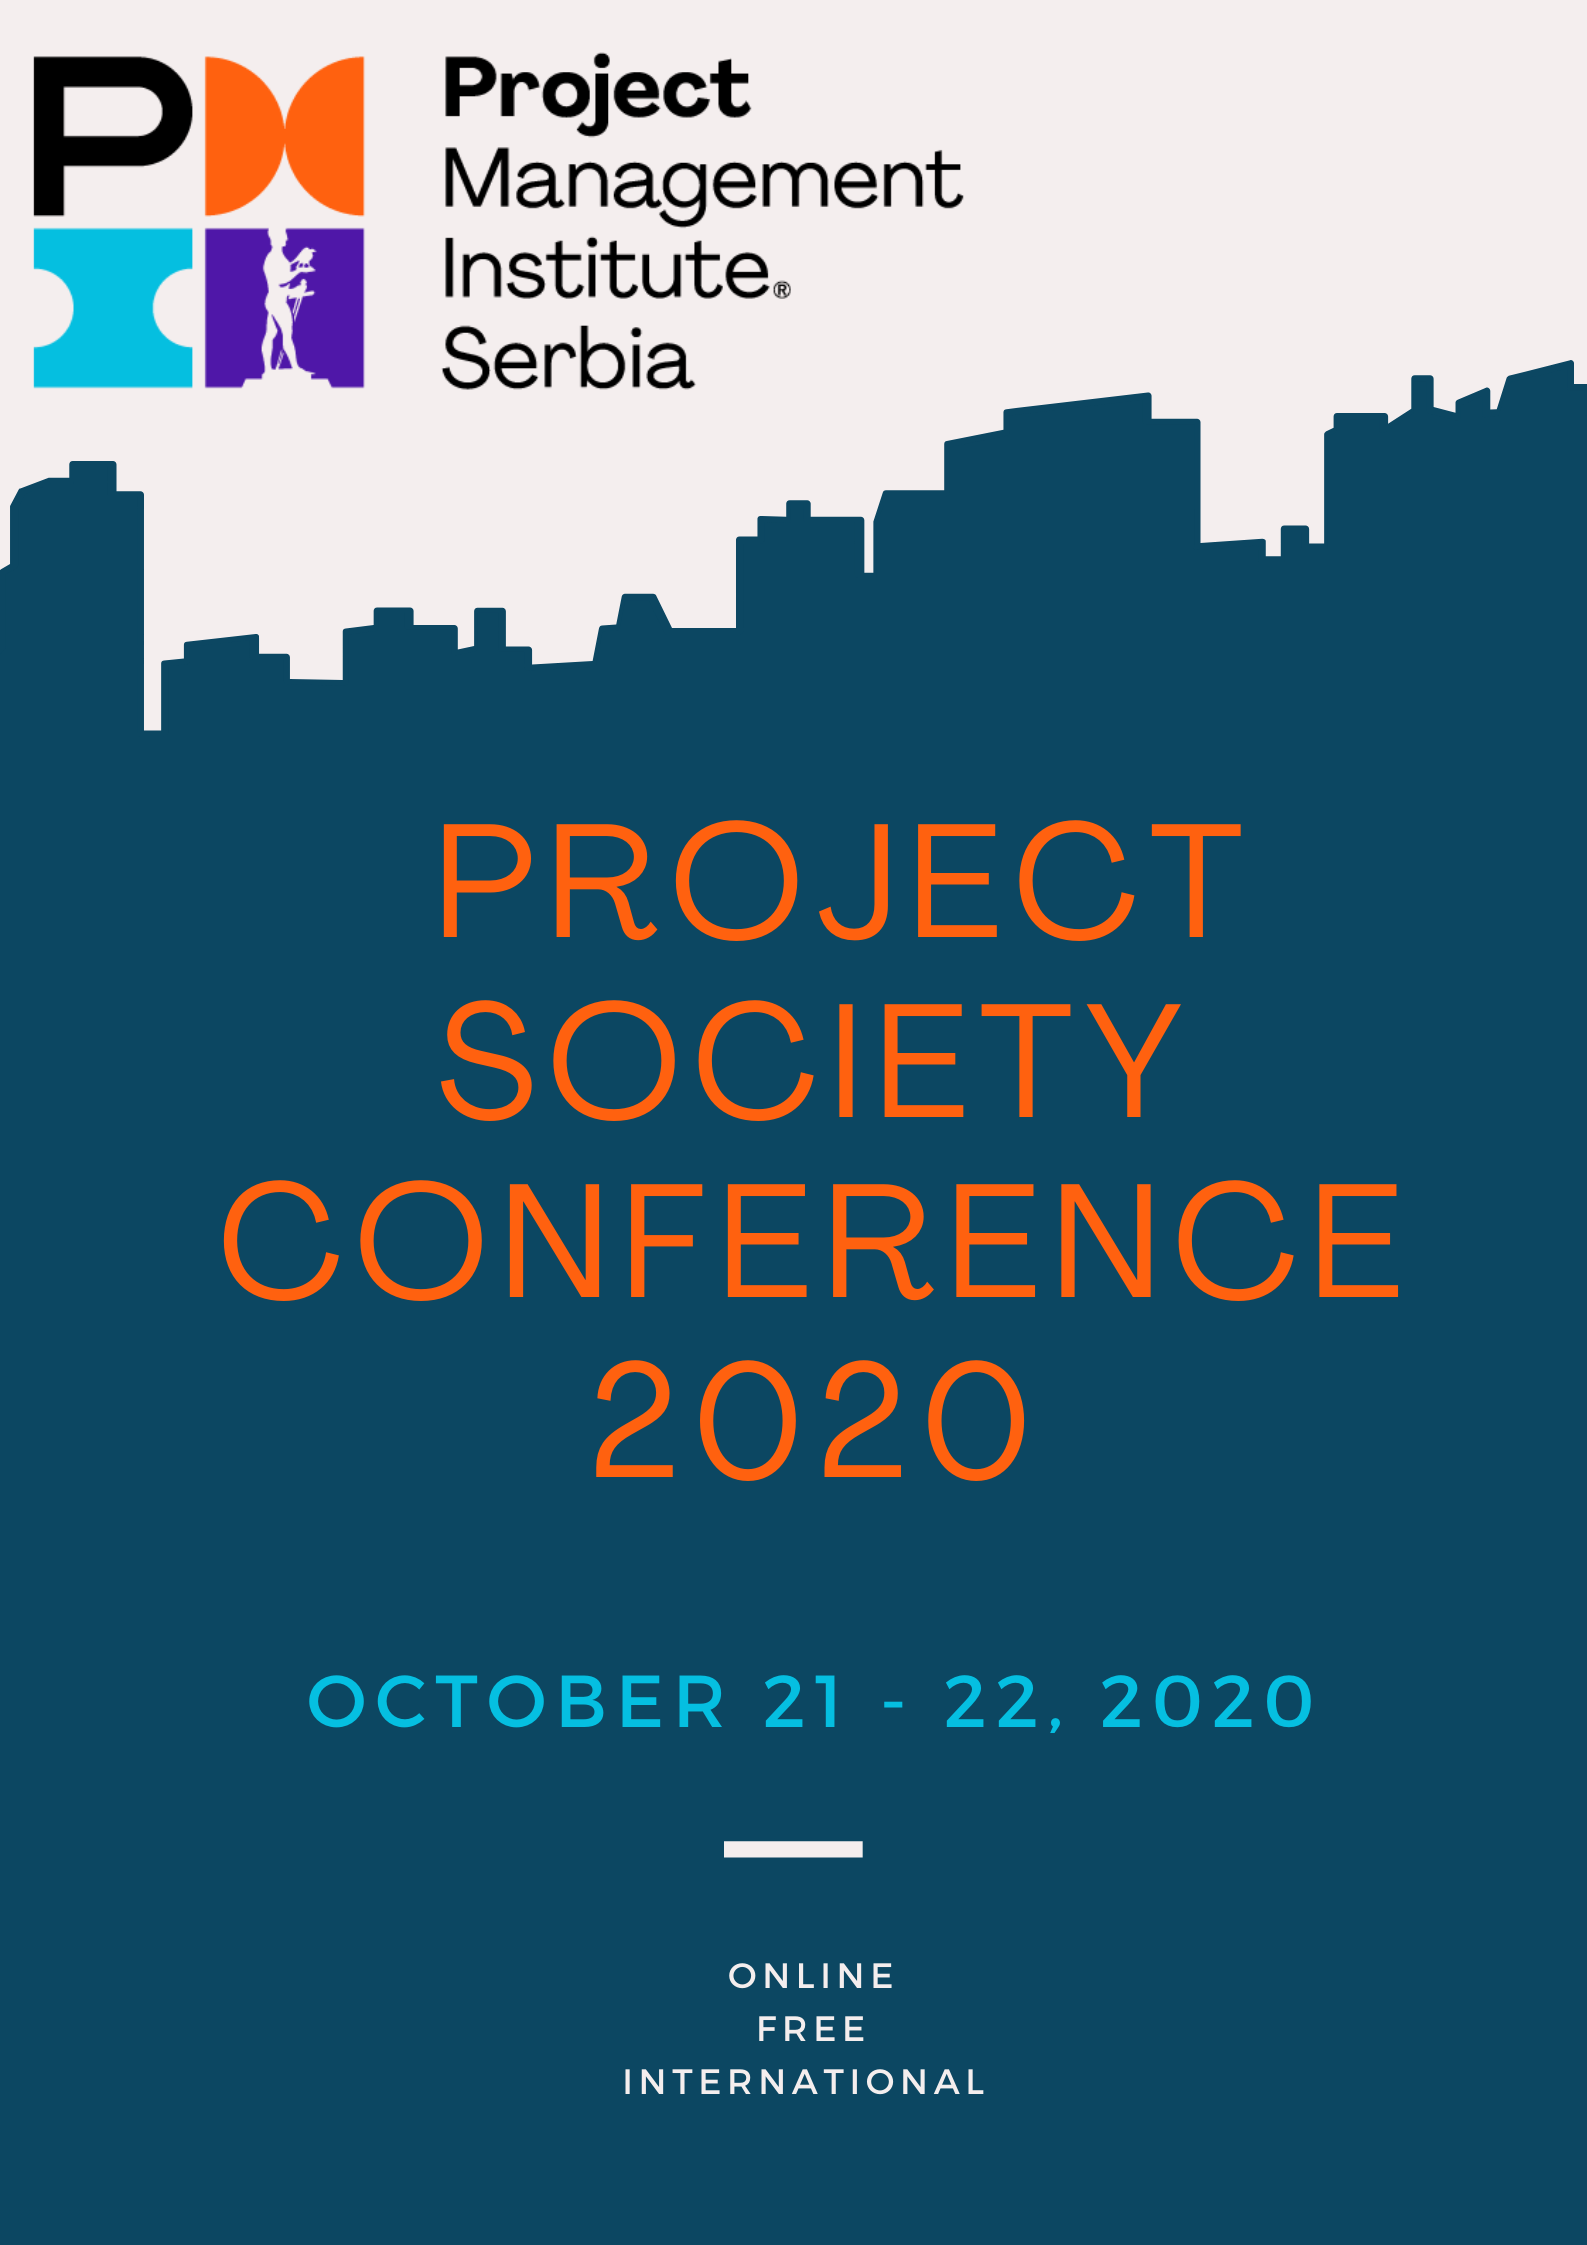 Project Society Conference 2020 – Invitation for Presenters